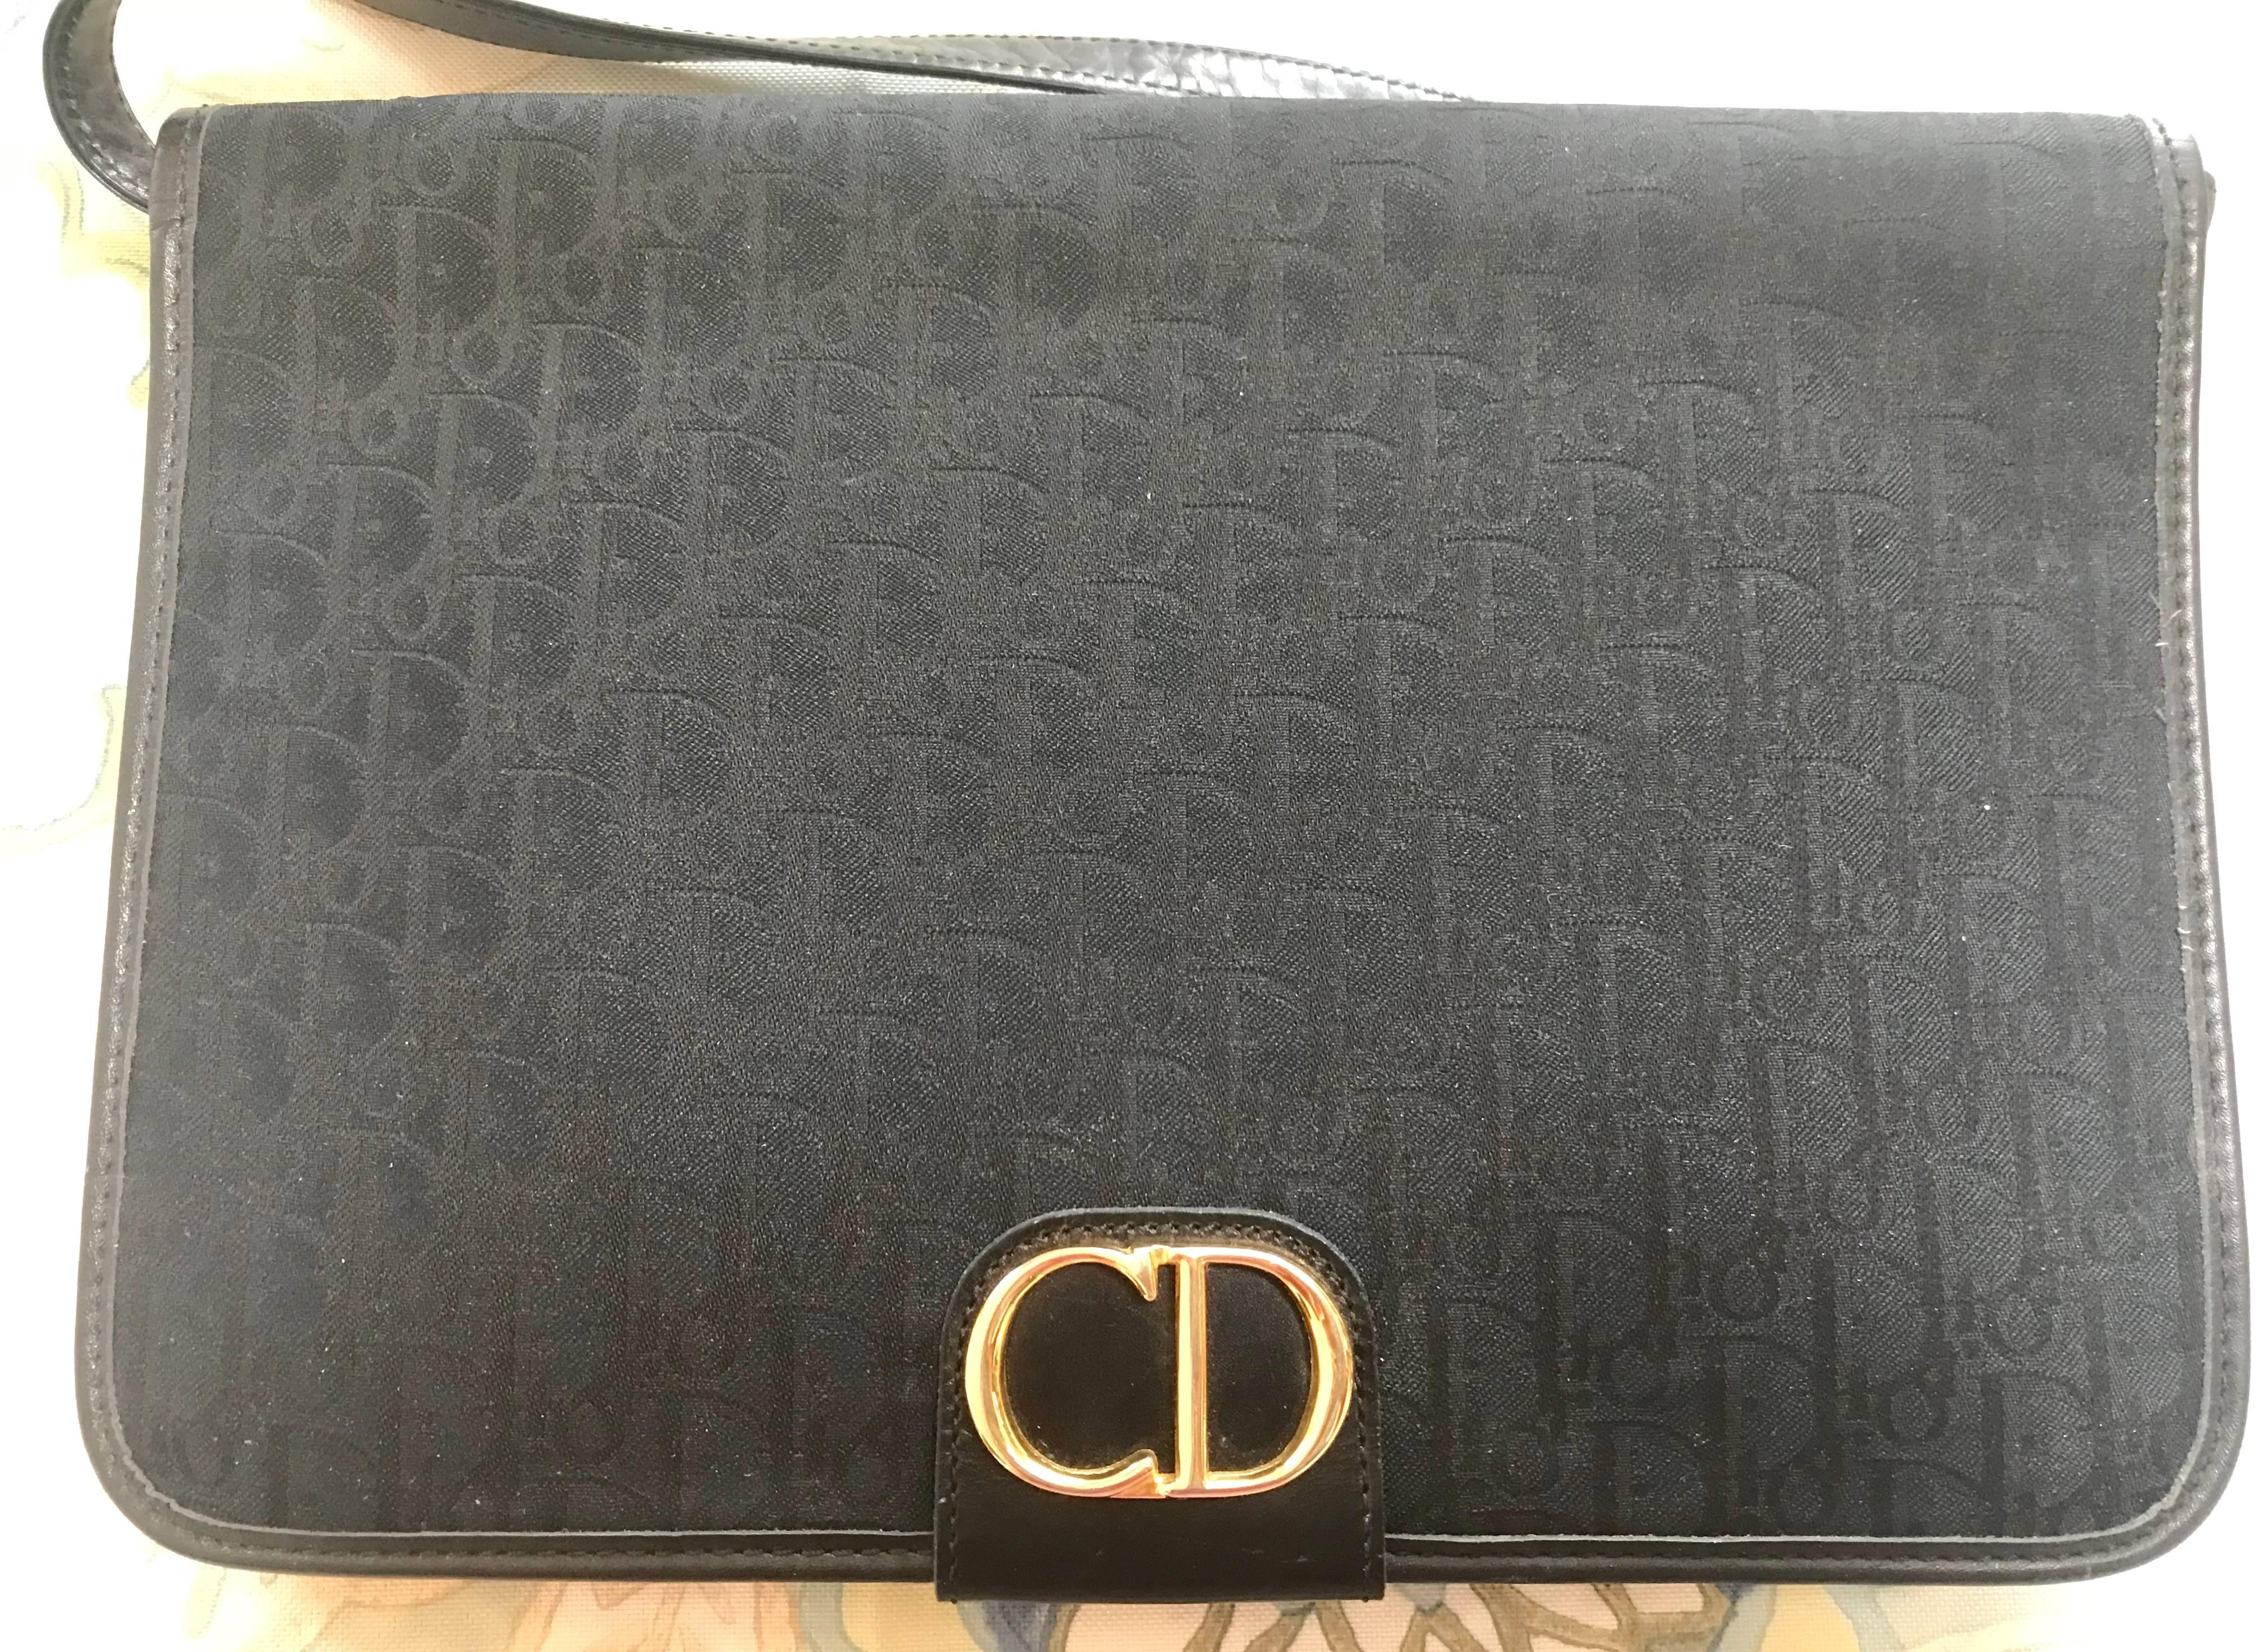 1990s.  Vintage Christian Dior black logo jacquard shoulder bag, clutch bag with a large golden CD motif.

Here is a vintage black clutch shoulder purse from Christian Dior back in the 90's.
Featuring a large golden 